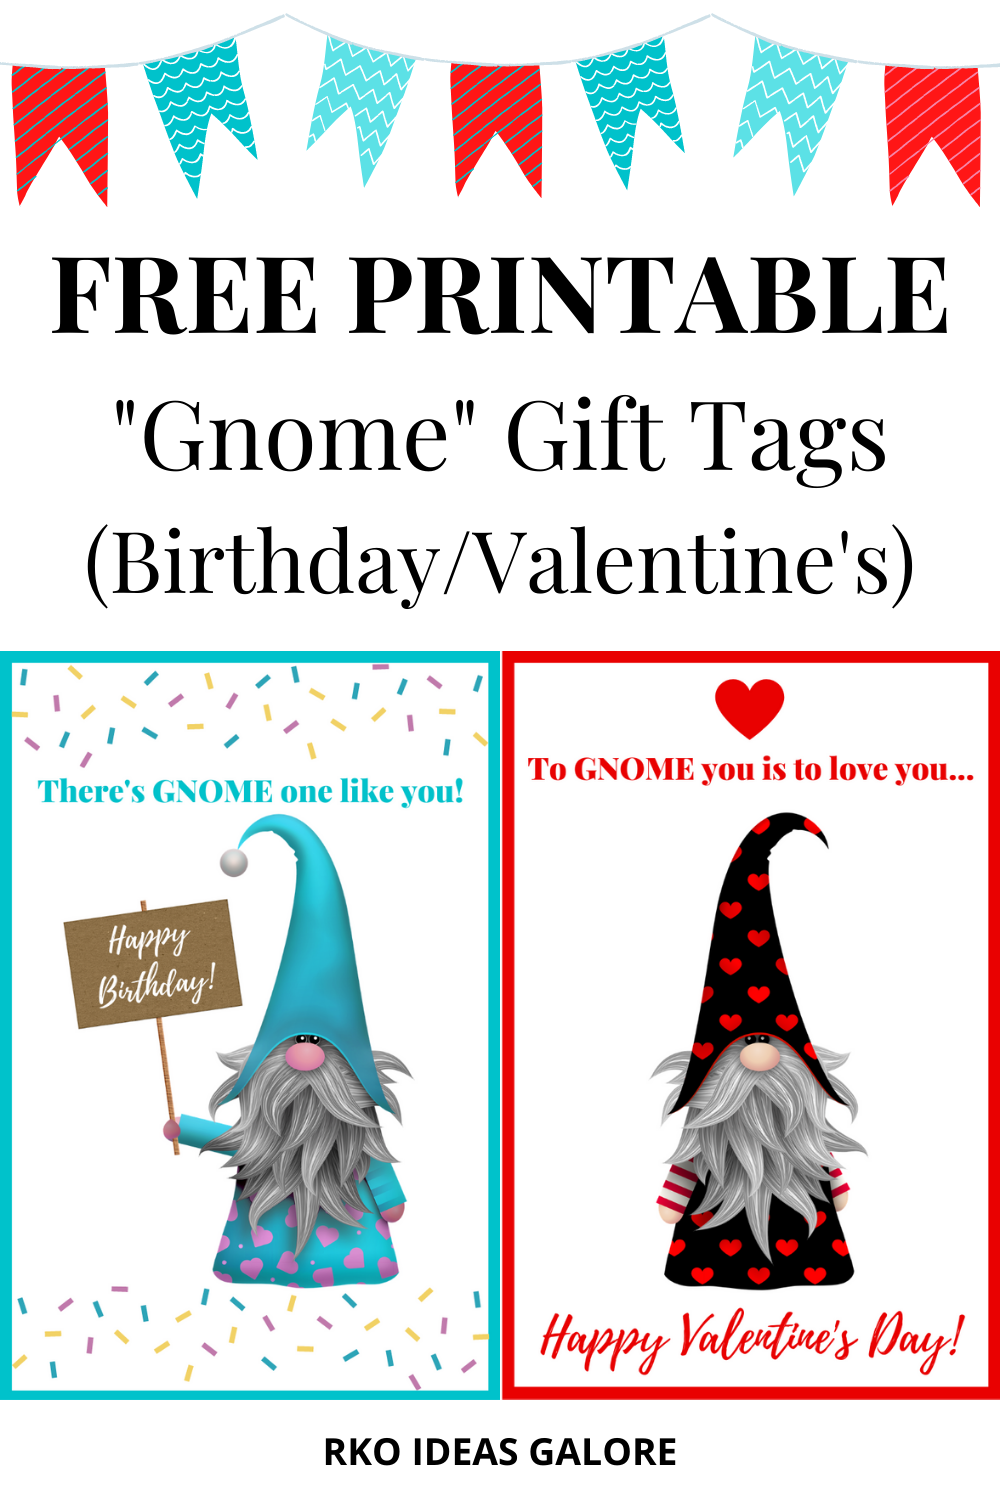 free-printable-gnome-gift-tags-bday-valentine-s-rko-ideas-galore-by